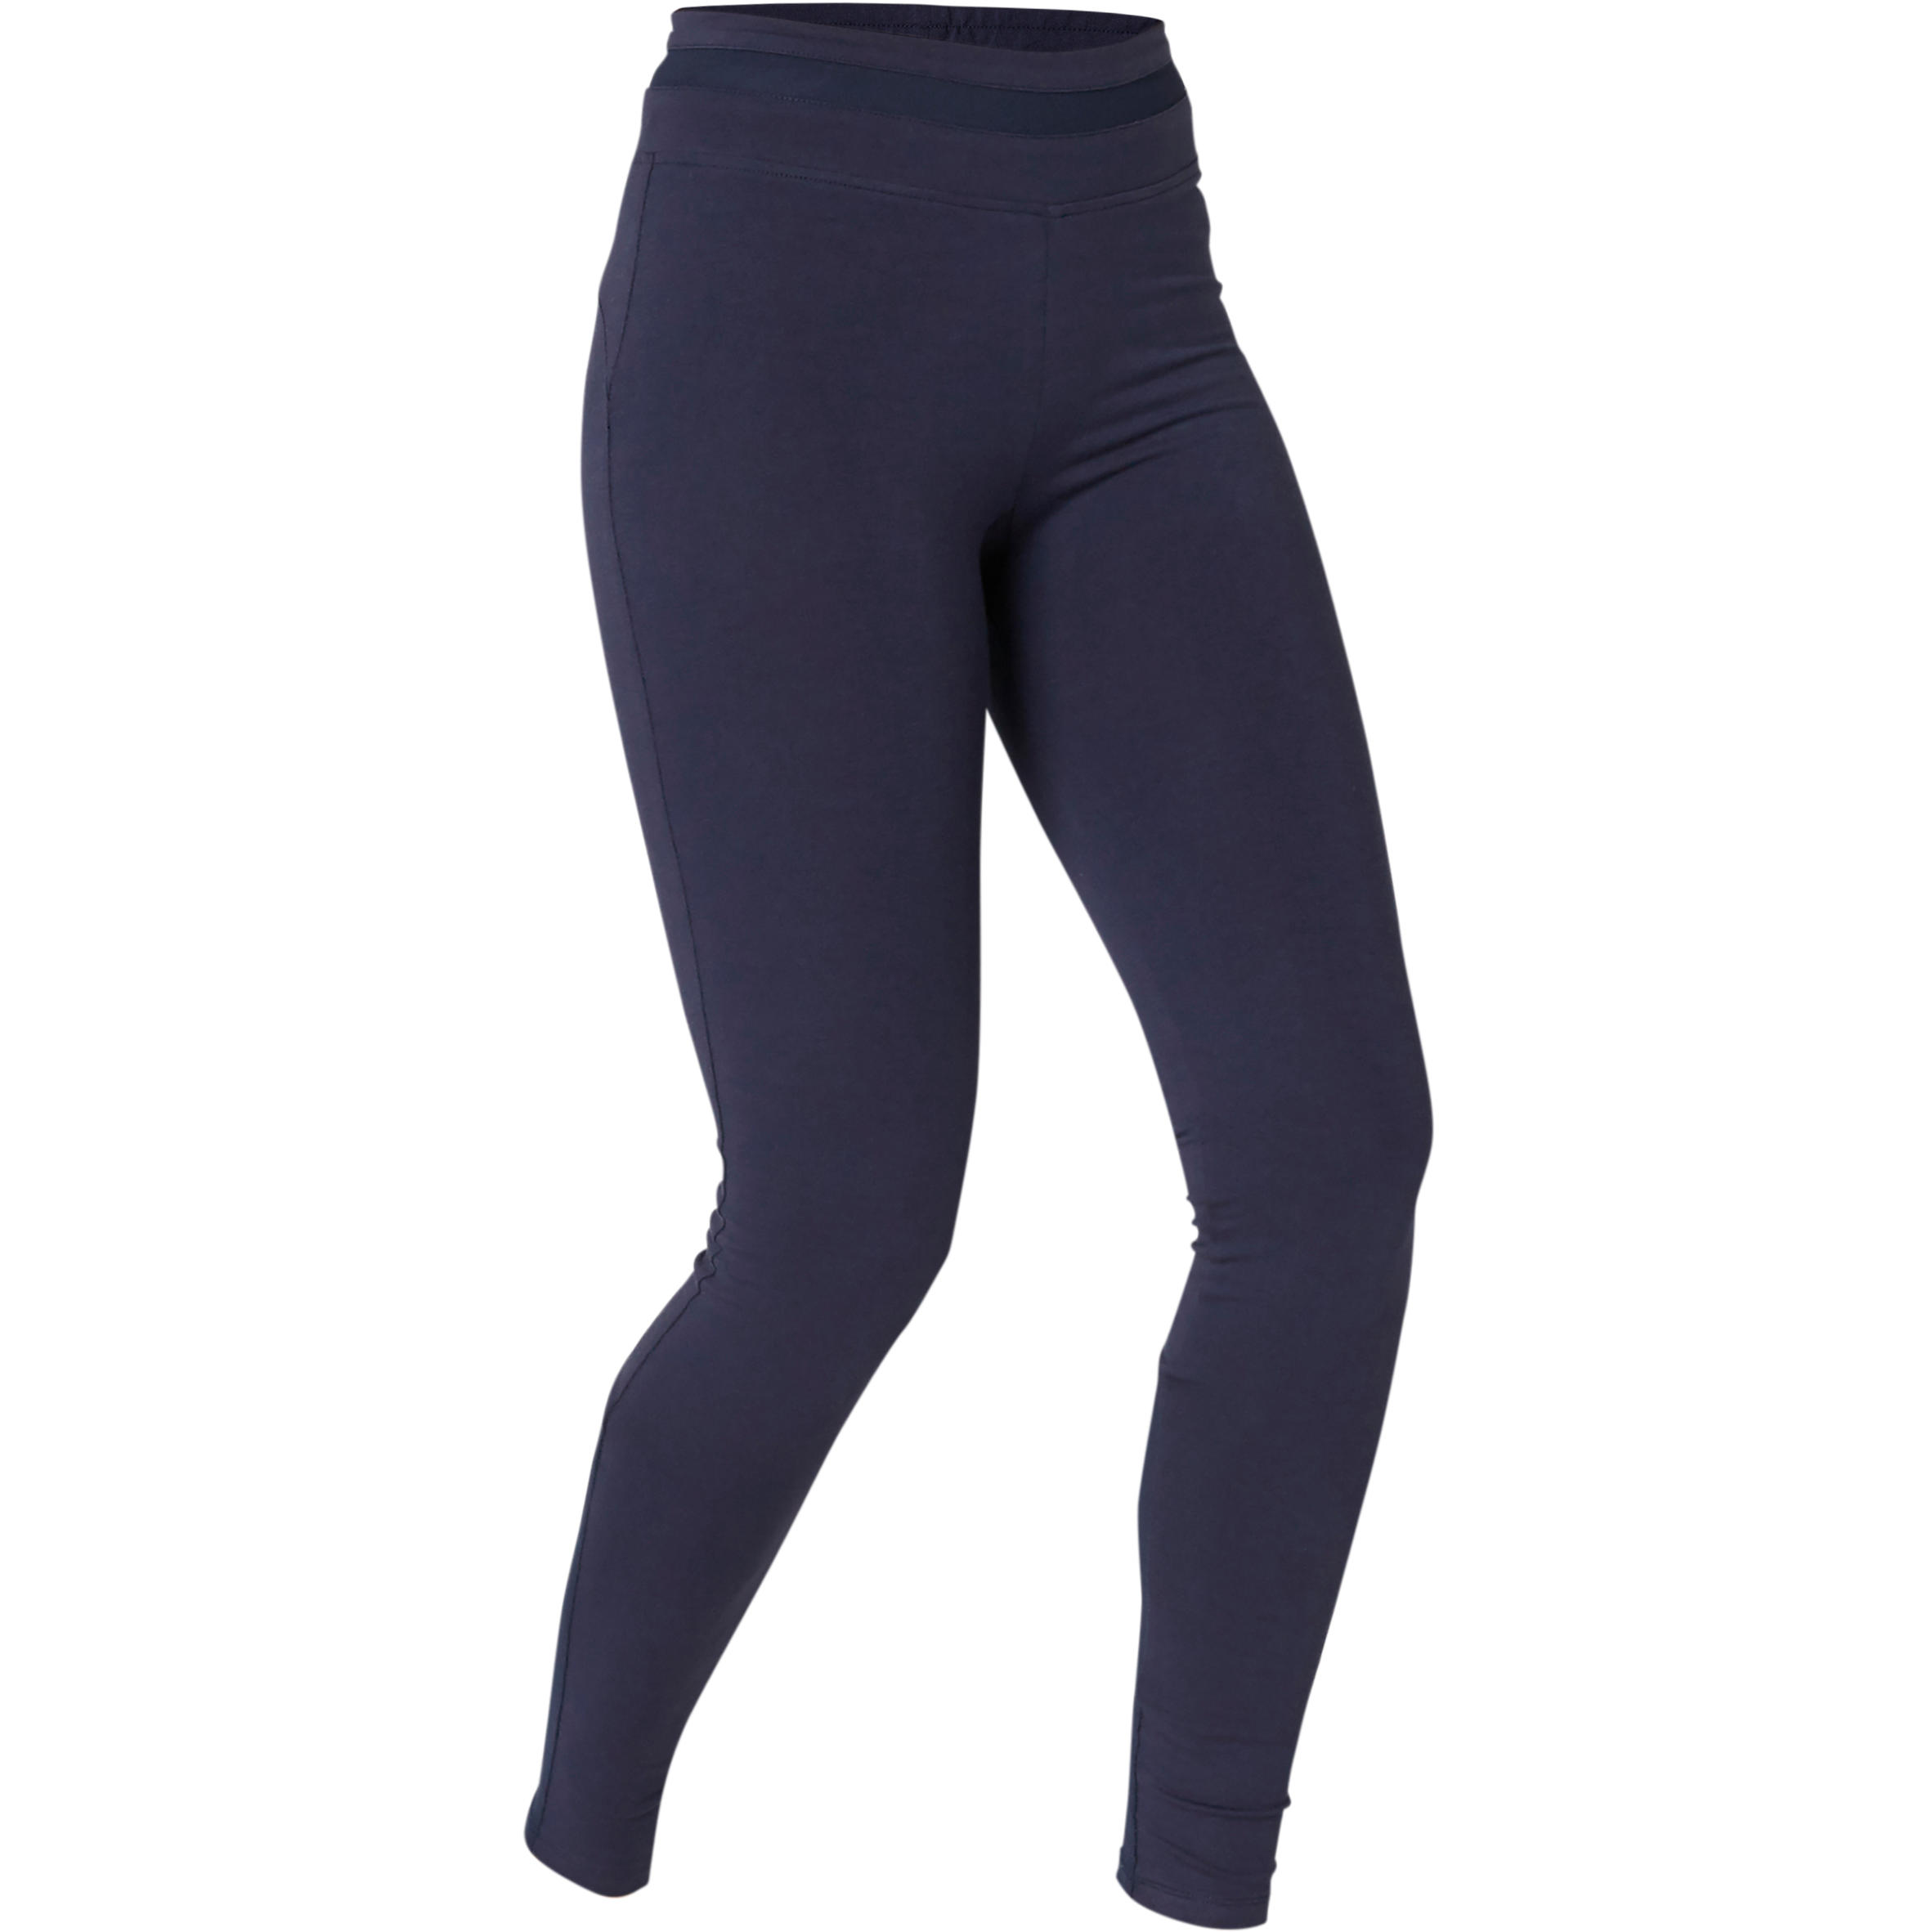 Leggings Wholesale Shop In Chennai Super | International Society of  Precision Agriculture